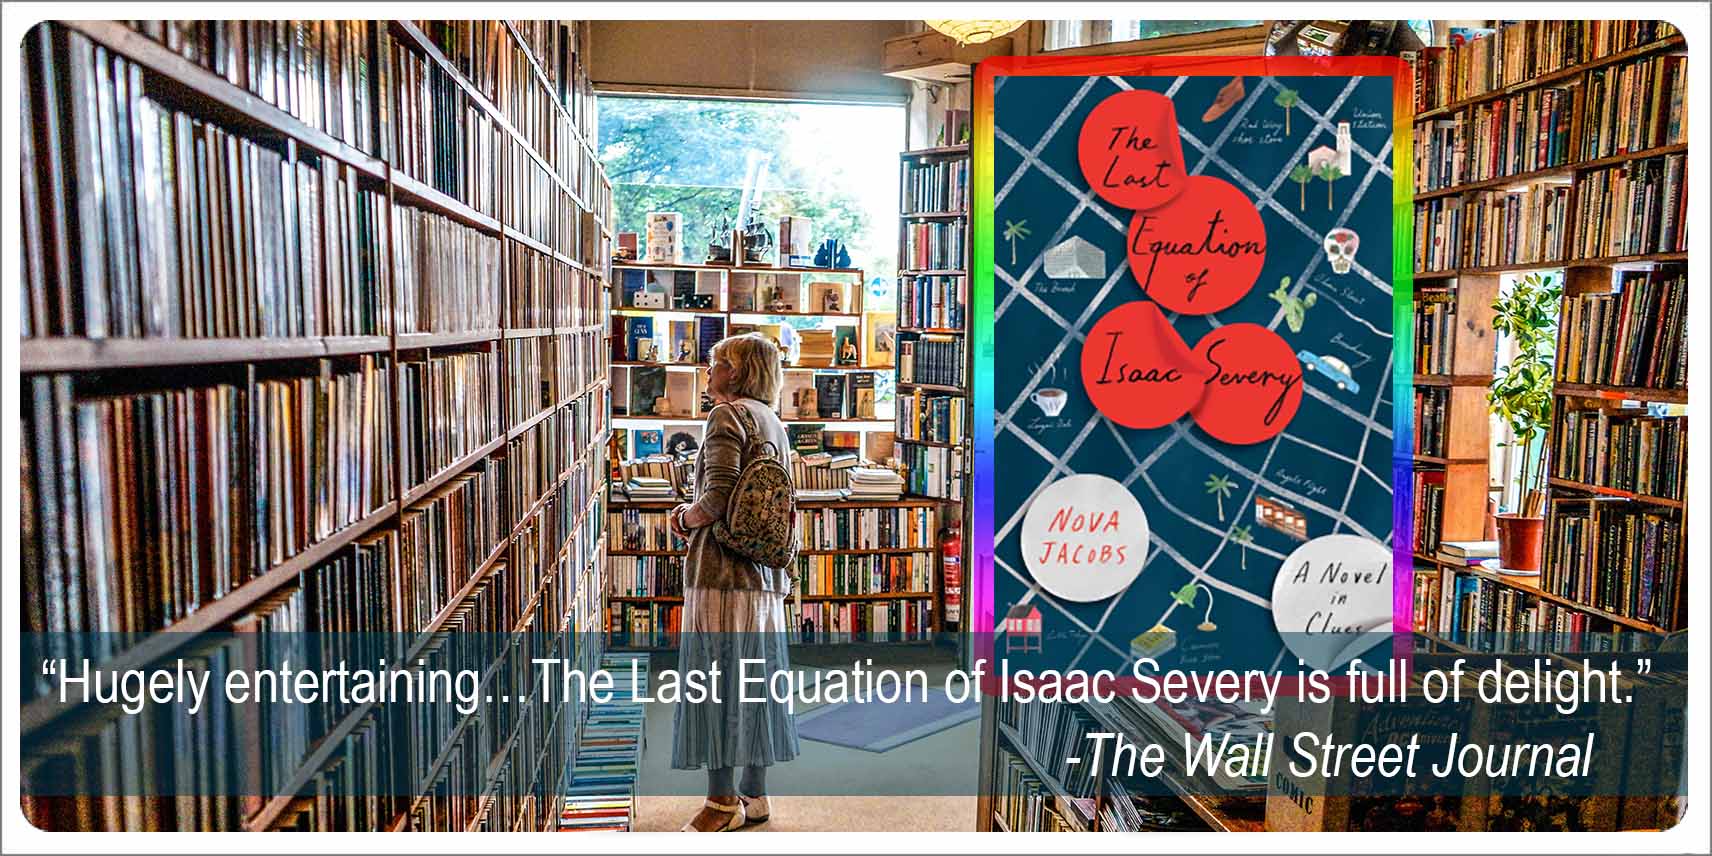 The Last Equation of Isaac Severy review